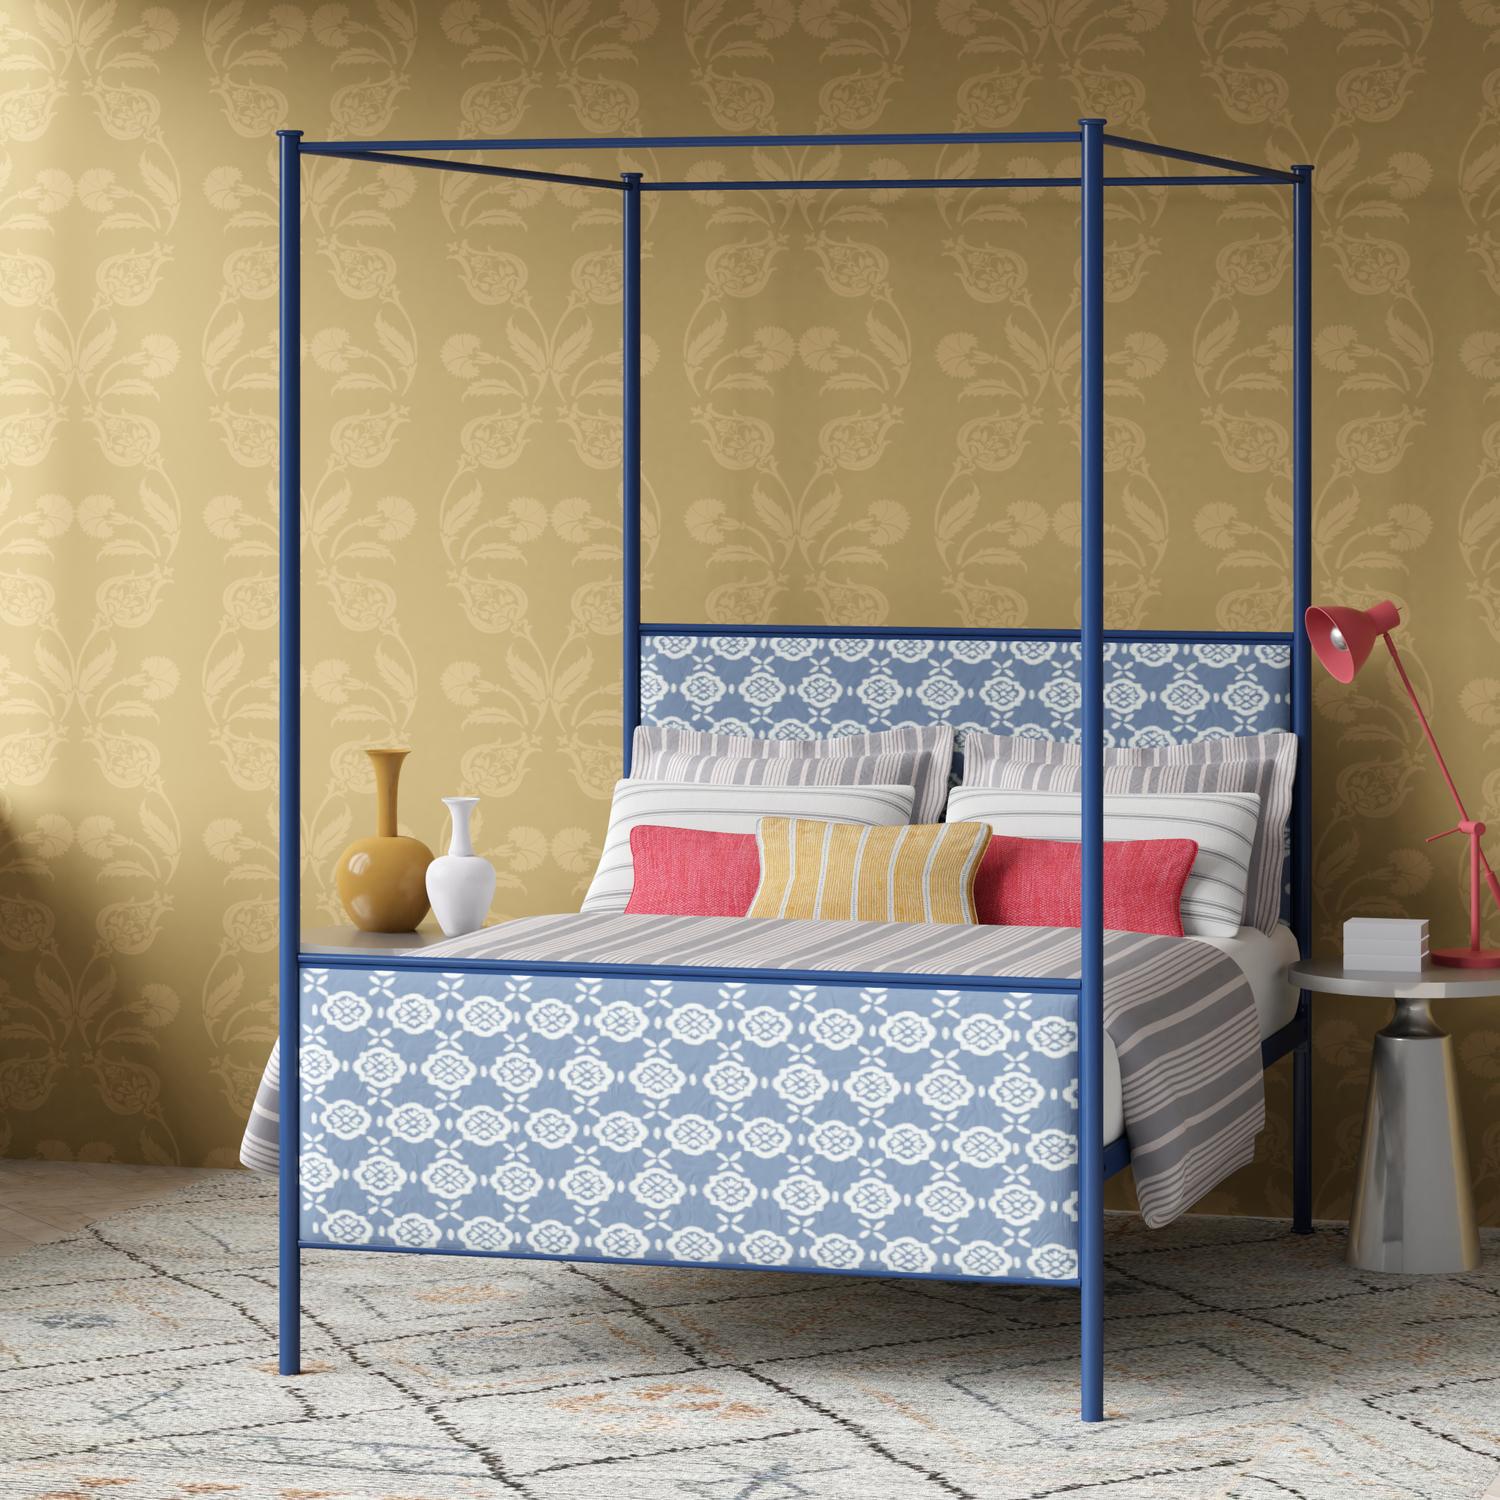 Reims metal bed - Image blue yellow